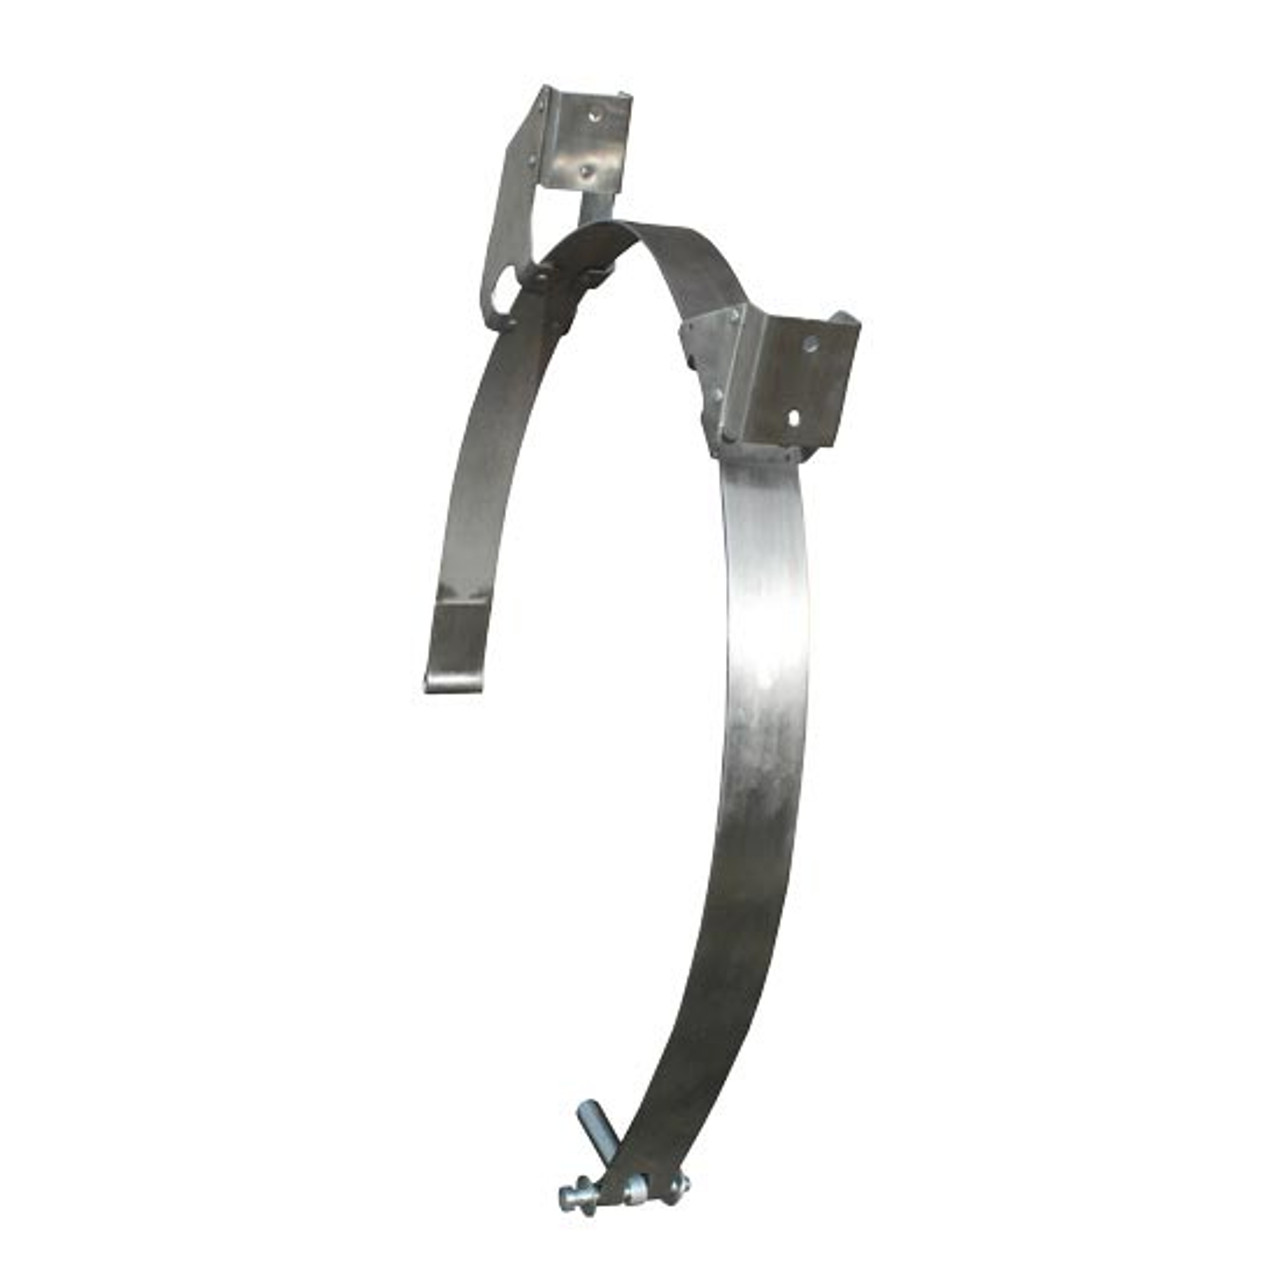 Stainless steel, Internationtal, fuel tank strap for 26, tanks